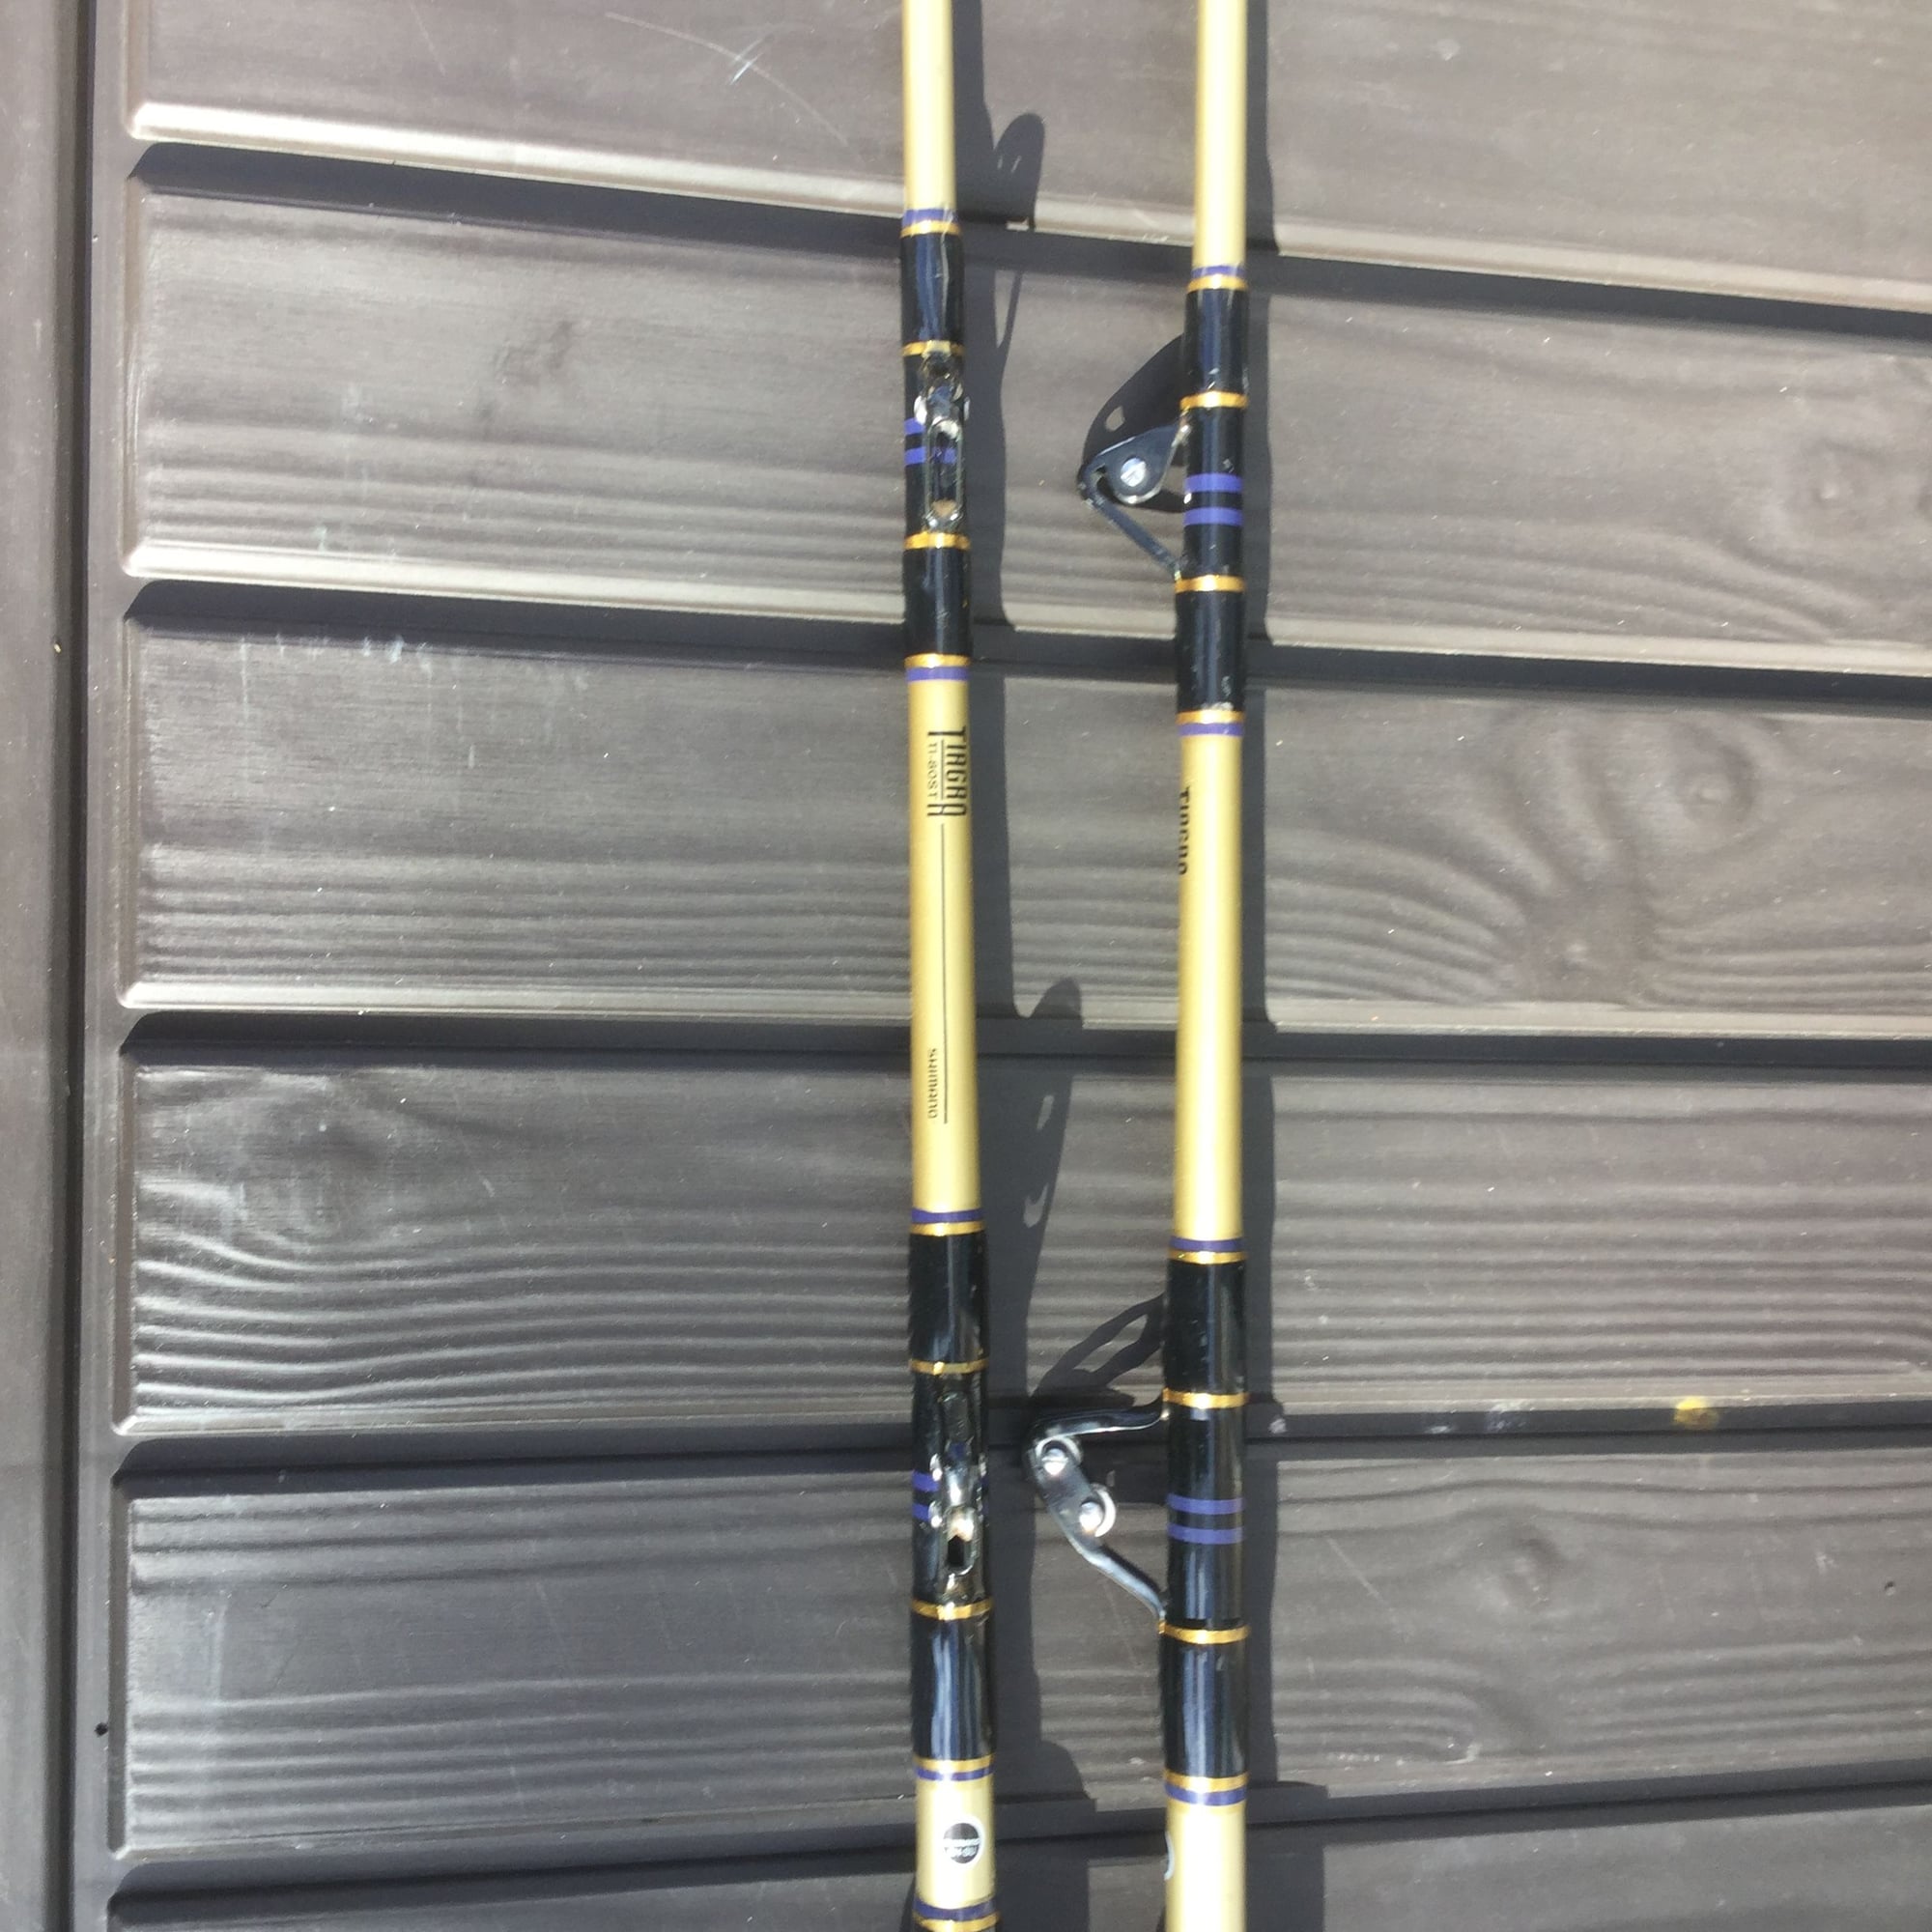 shimano tiagra rods for sale - The Hull Truth - Boating and Fishing Forum